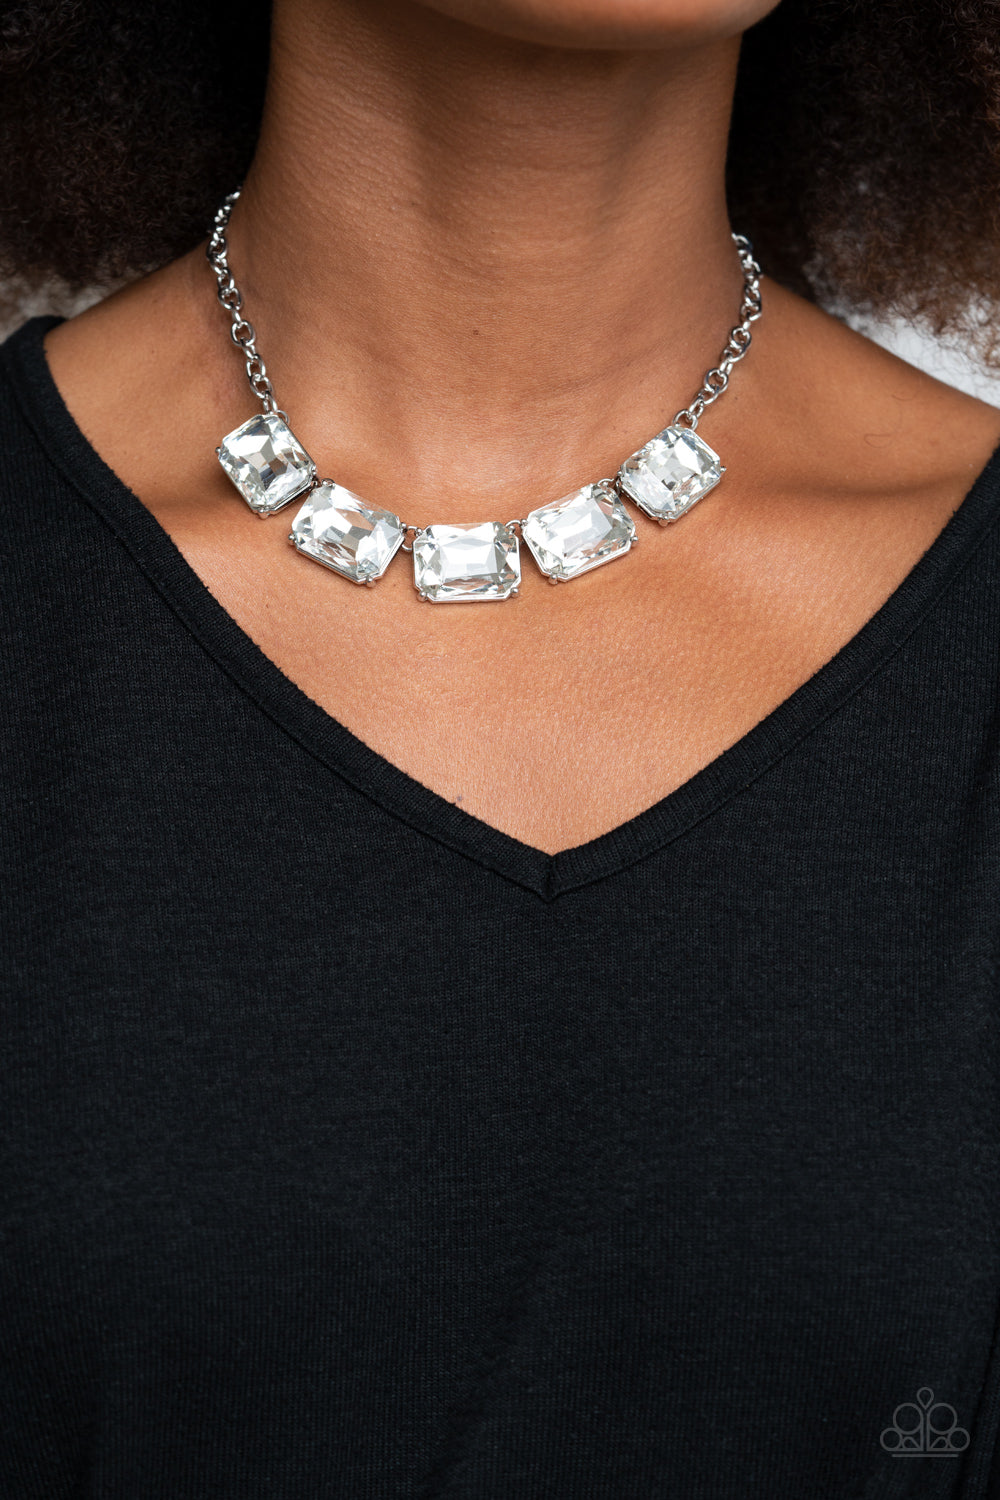 Deep Freeze Diva White Necklace - Paparazzi Accessories  Featuring regal emerald style cuts, an oversized collection of white rhinestones dramatically link below the collar for an icy finish. Features an adjustable clasp closure. All Paparazzi Accessories are lead free and nickel free!  Sold as one individual necklace. Includes one pair of matching earrings.